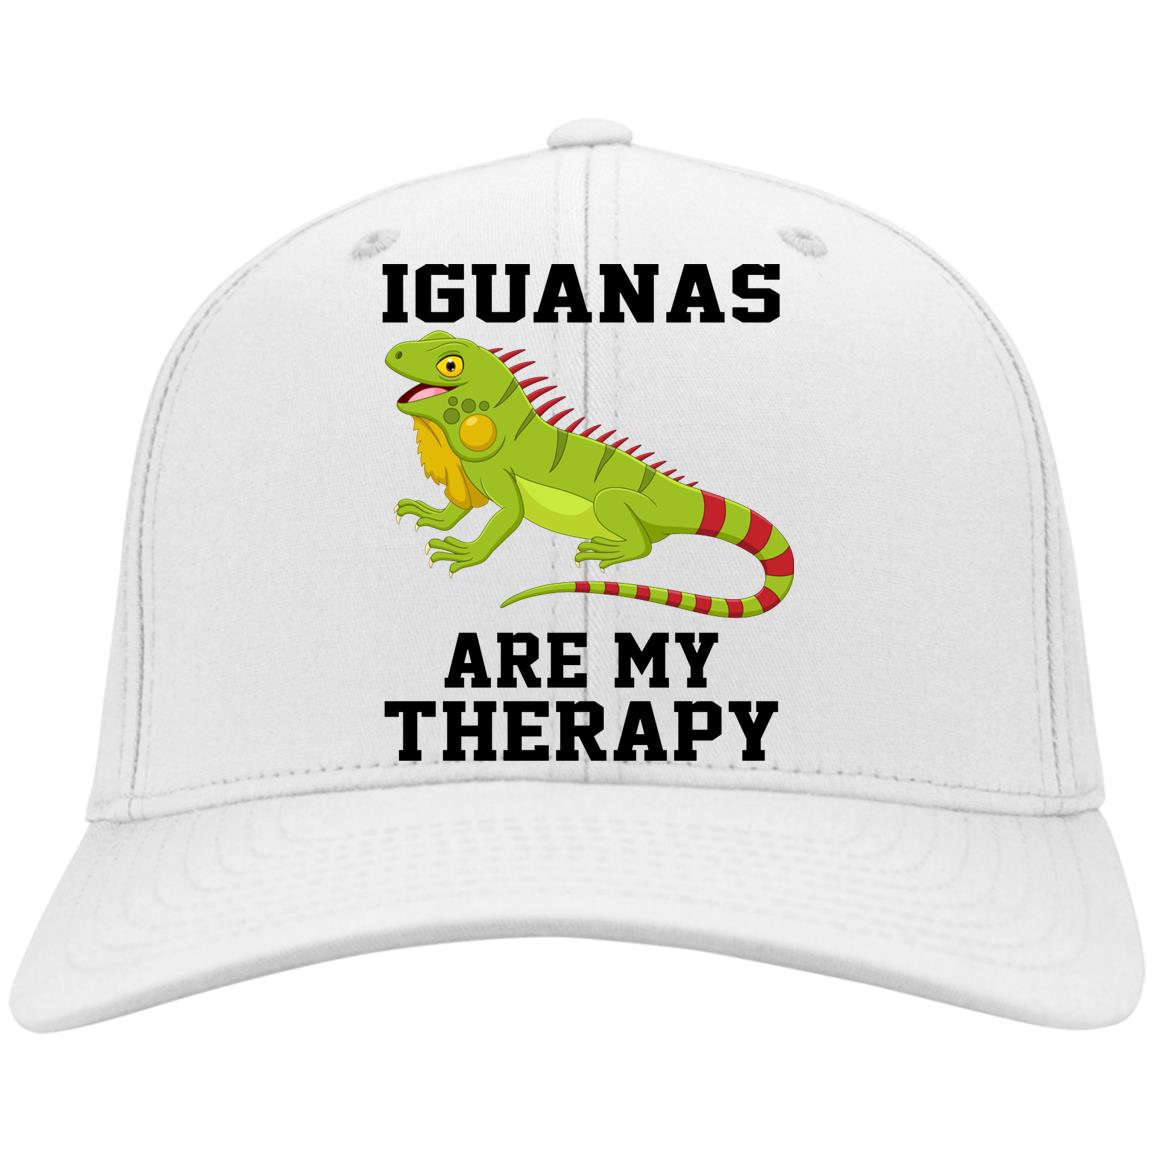 Iguanas Are My Therapy - Twill Cap